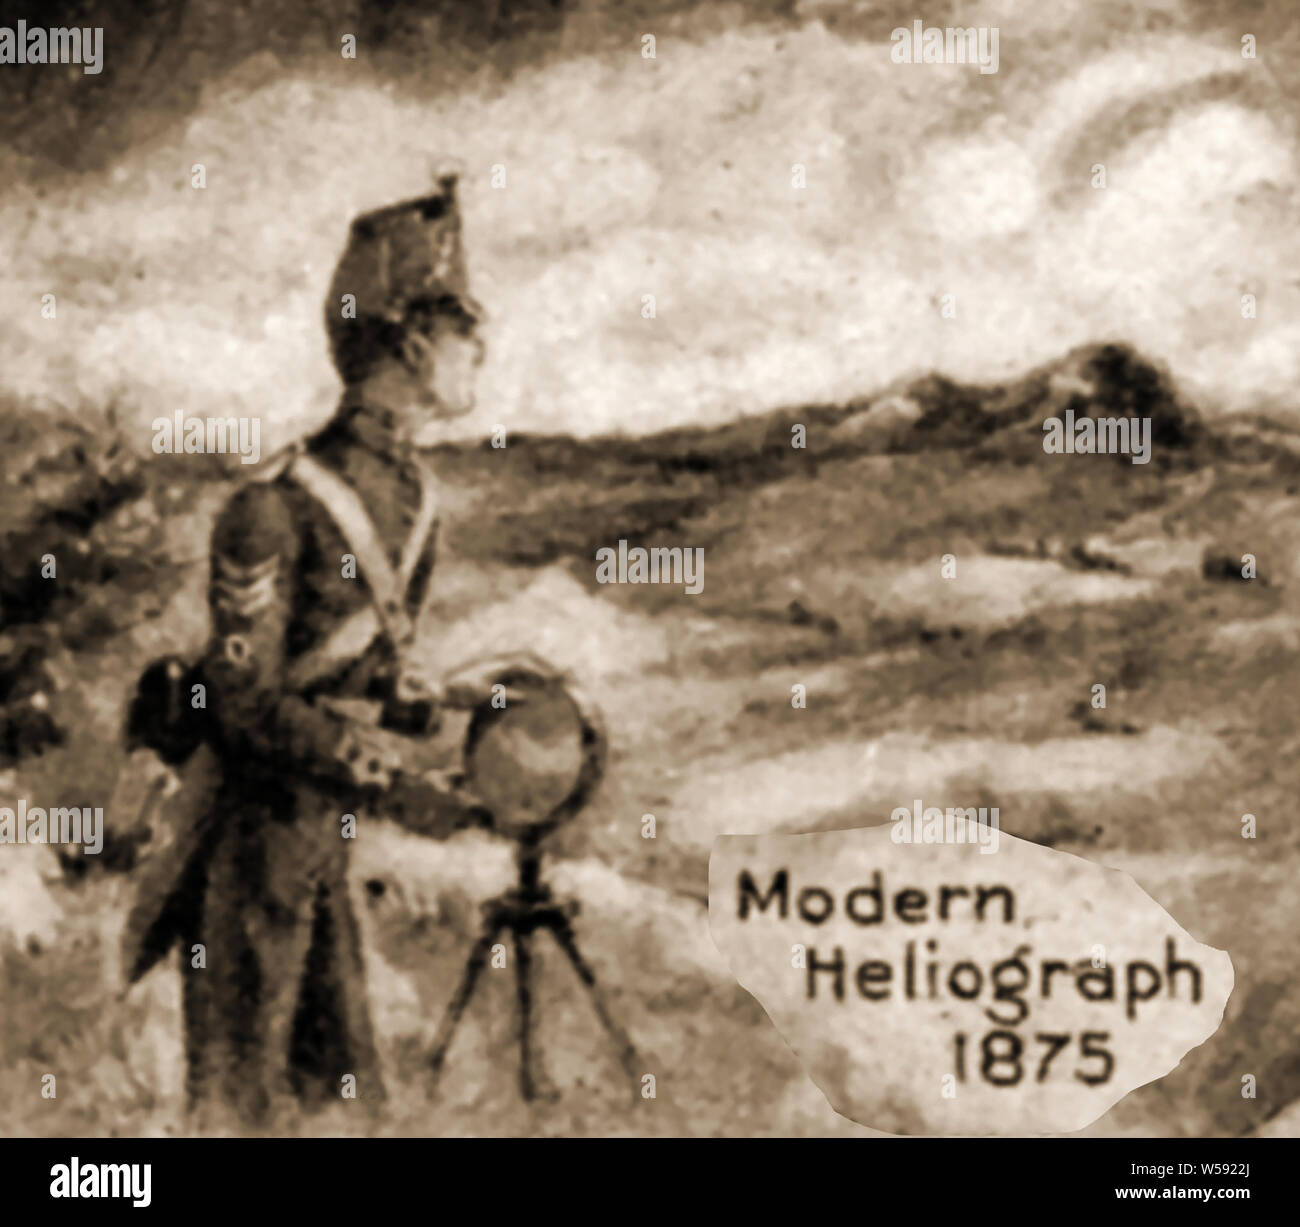 A History of telegraphy and communications 4 - Military use - A soldier using an heliograph in 1875 Stock Photo